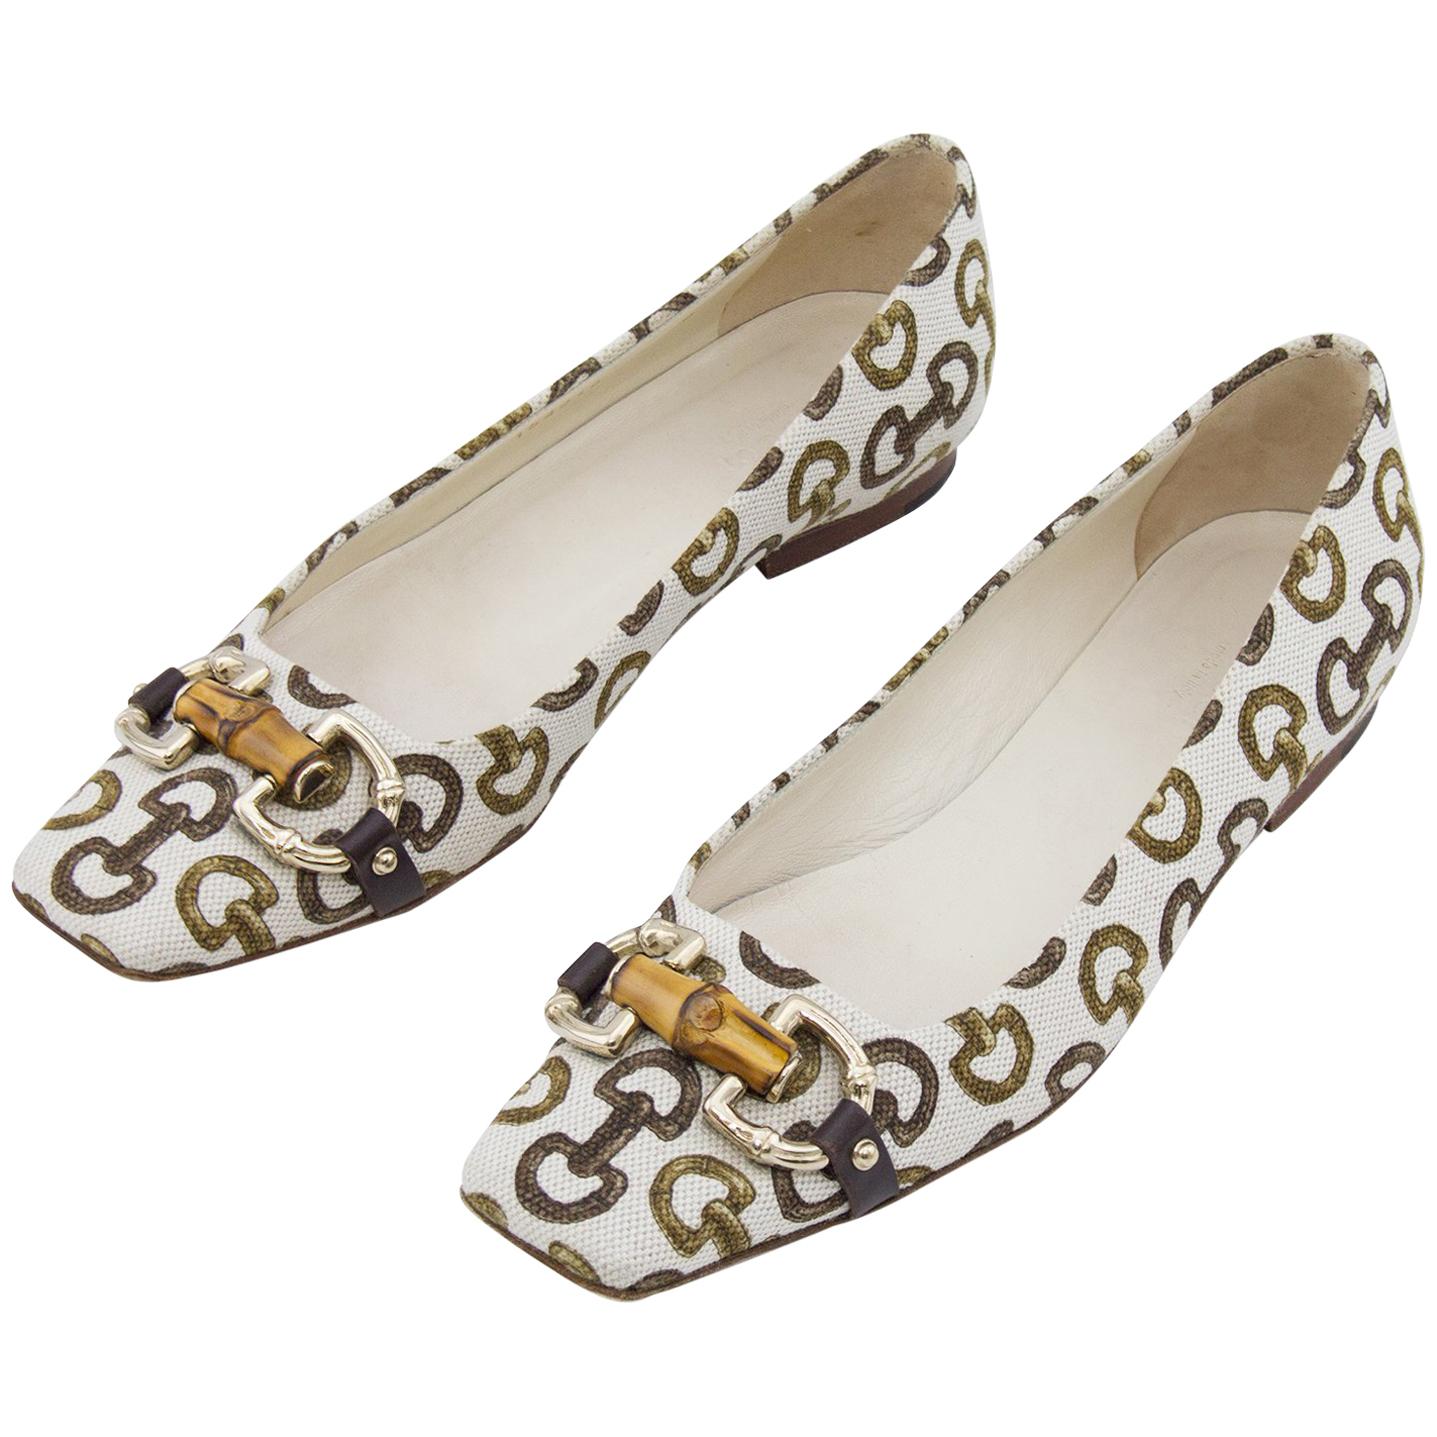 Early 2000s Gucci Bamboo and Horsebit Printed Flats